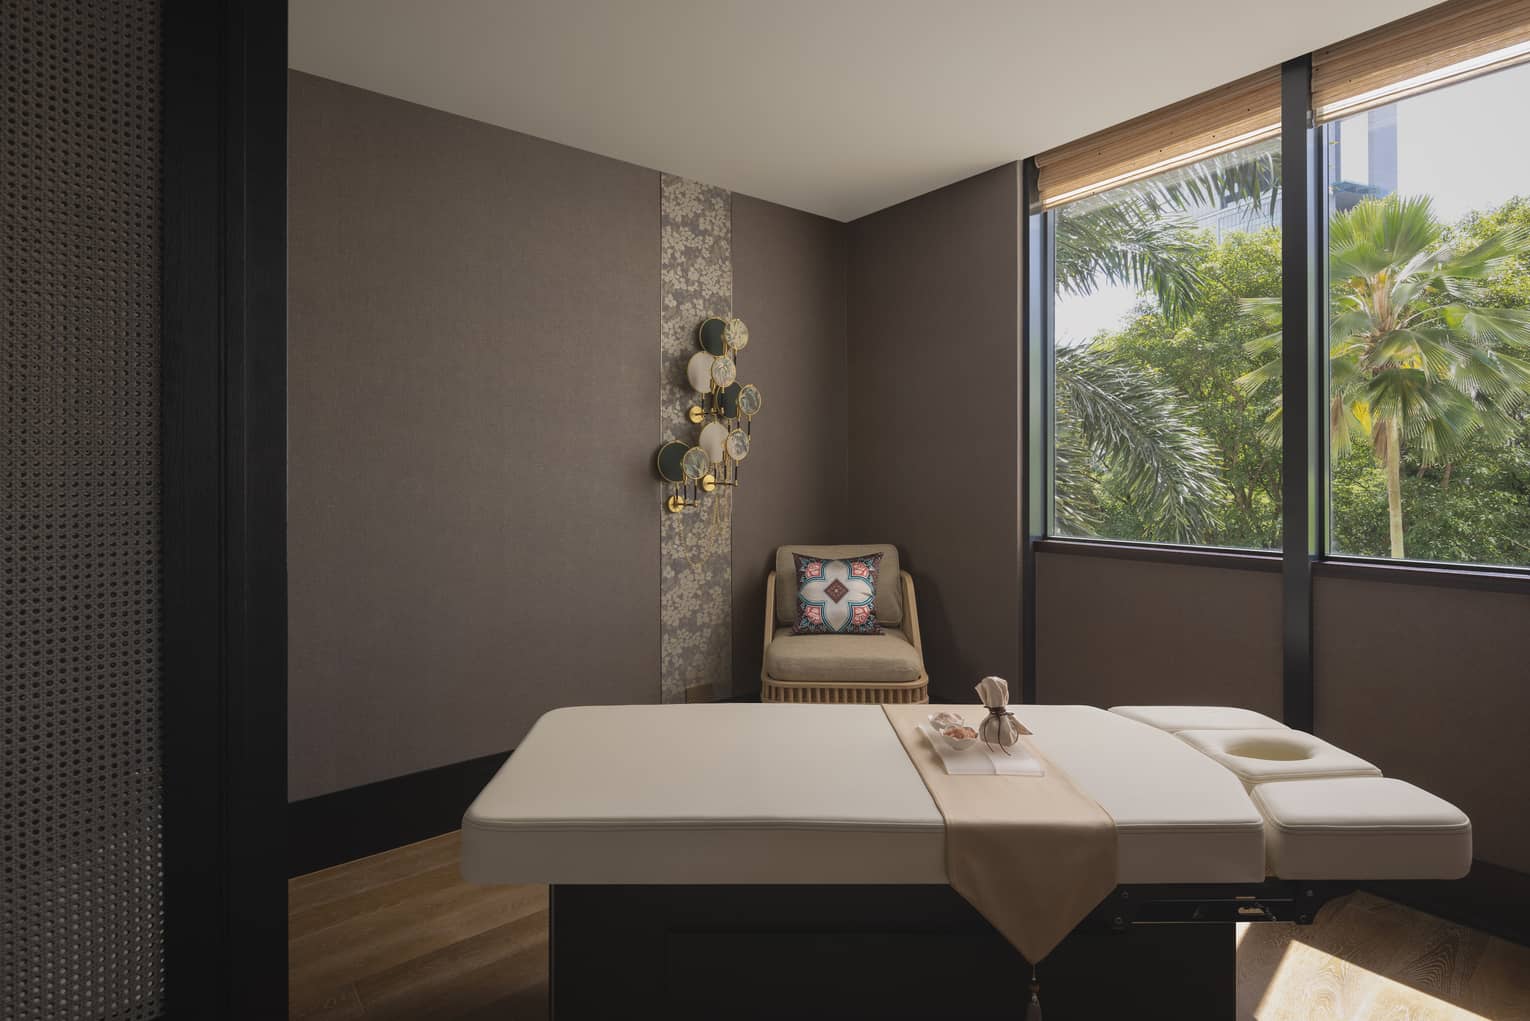 massage table with a view of the jungle outside the window